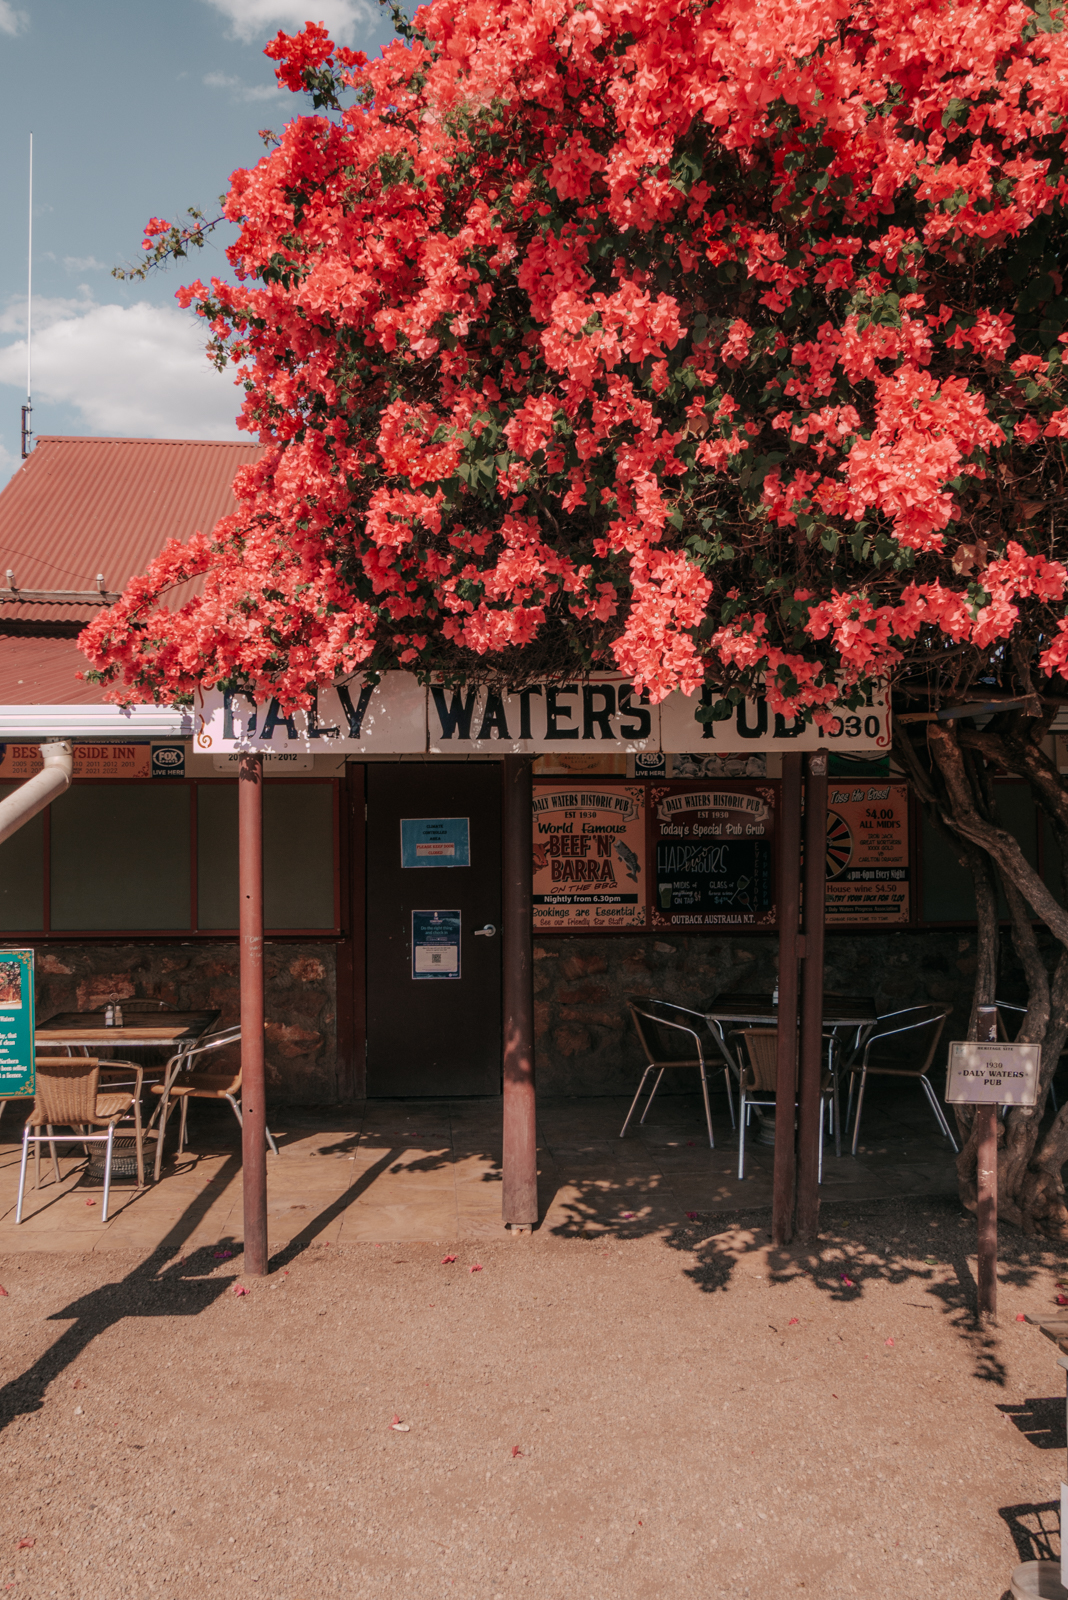 Daly Waters Pub im Northern Territory